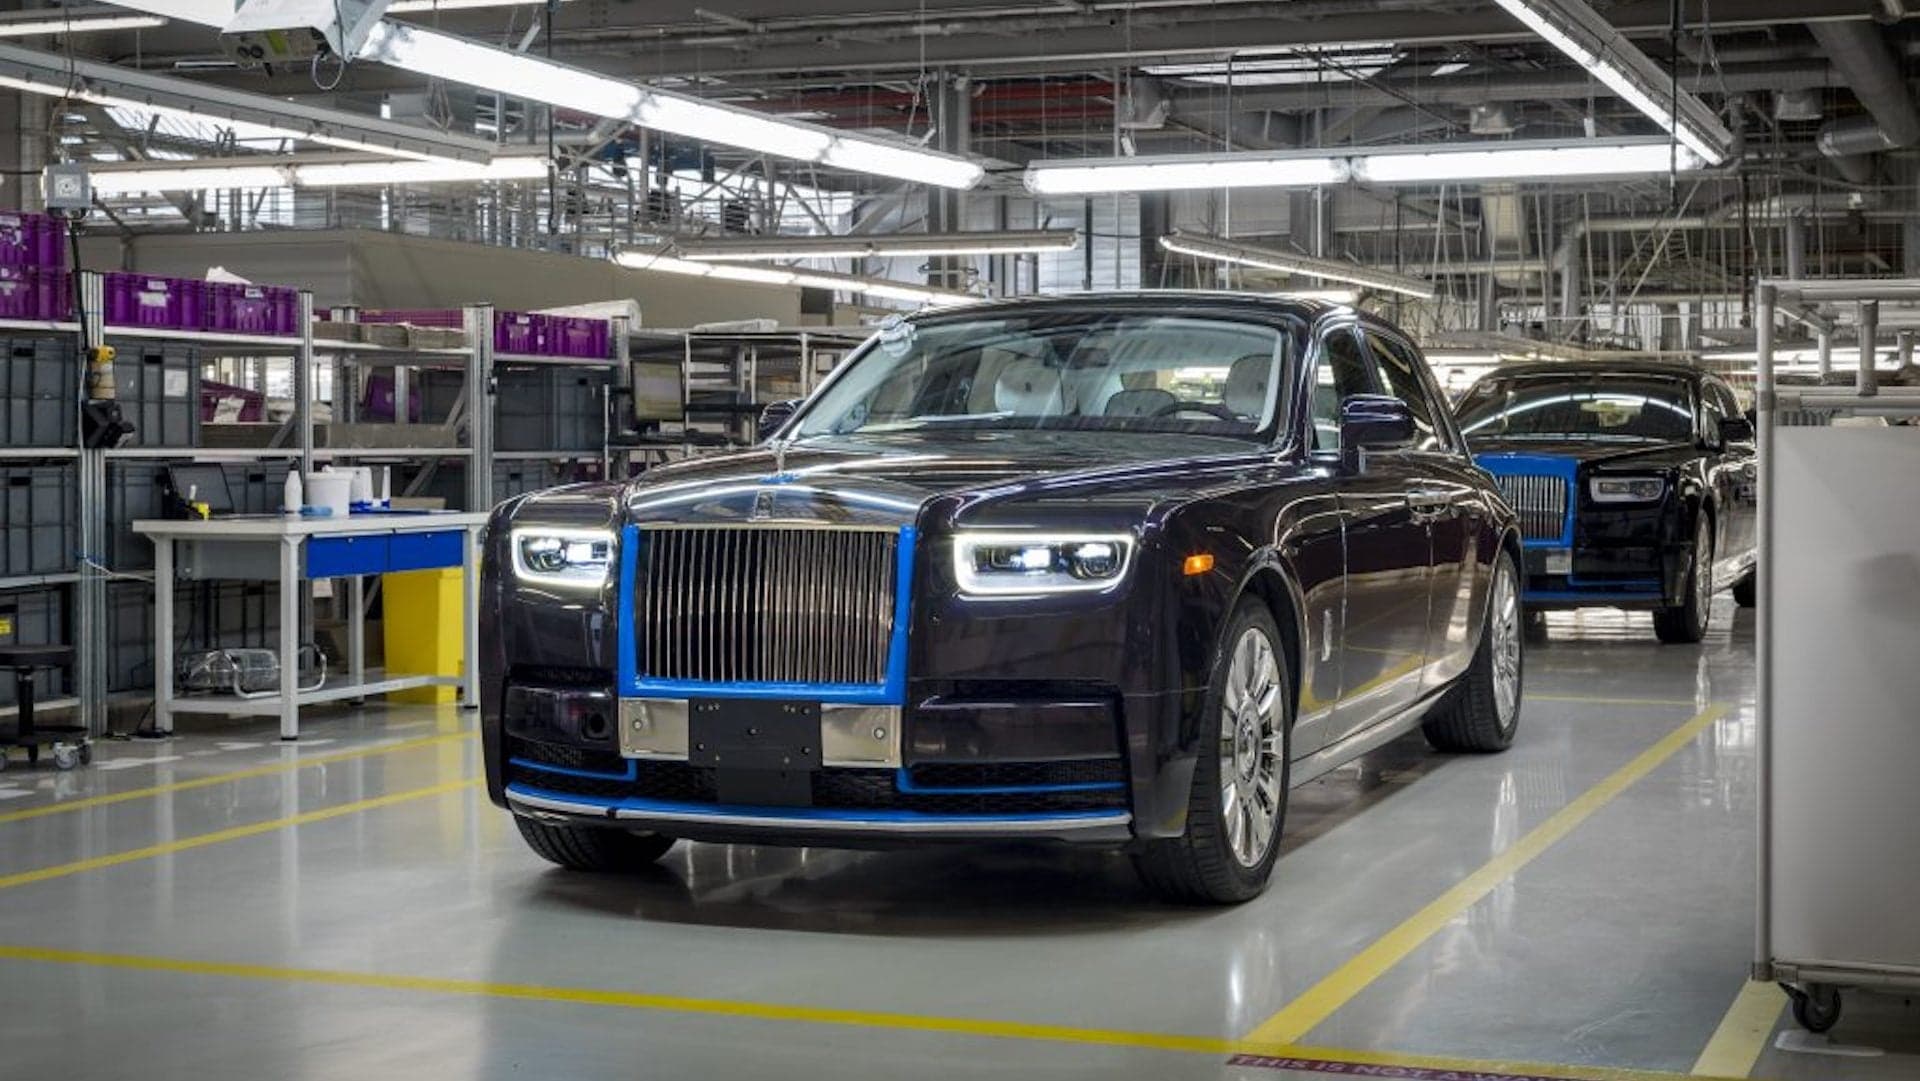 Midwest Couple Pays $780,000 for a Rolls-Royce Phantom and Some Bottles of Wine